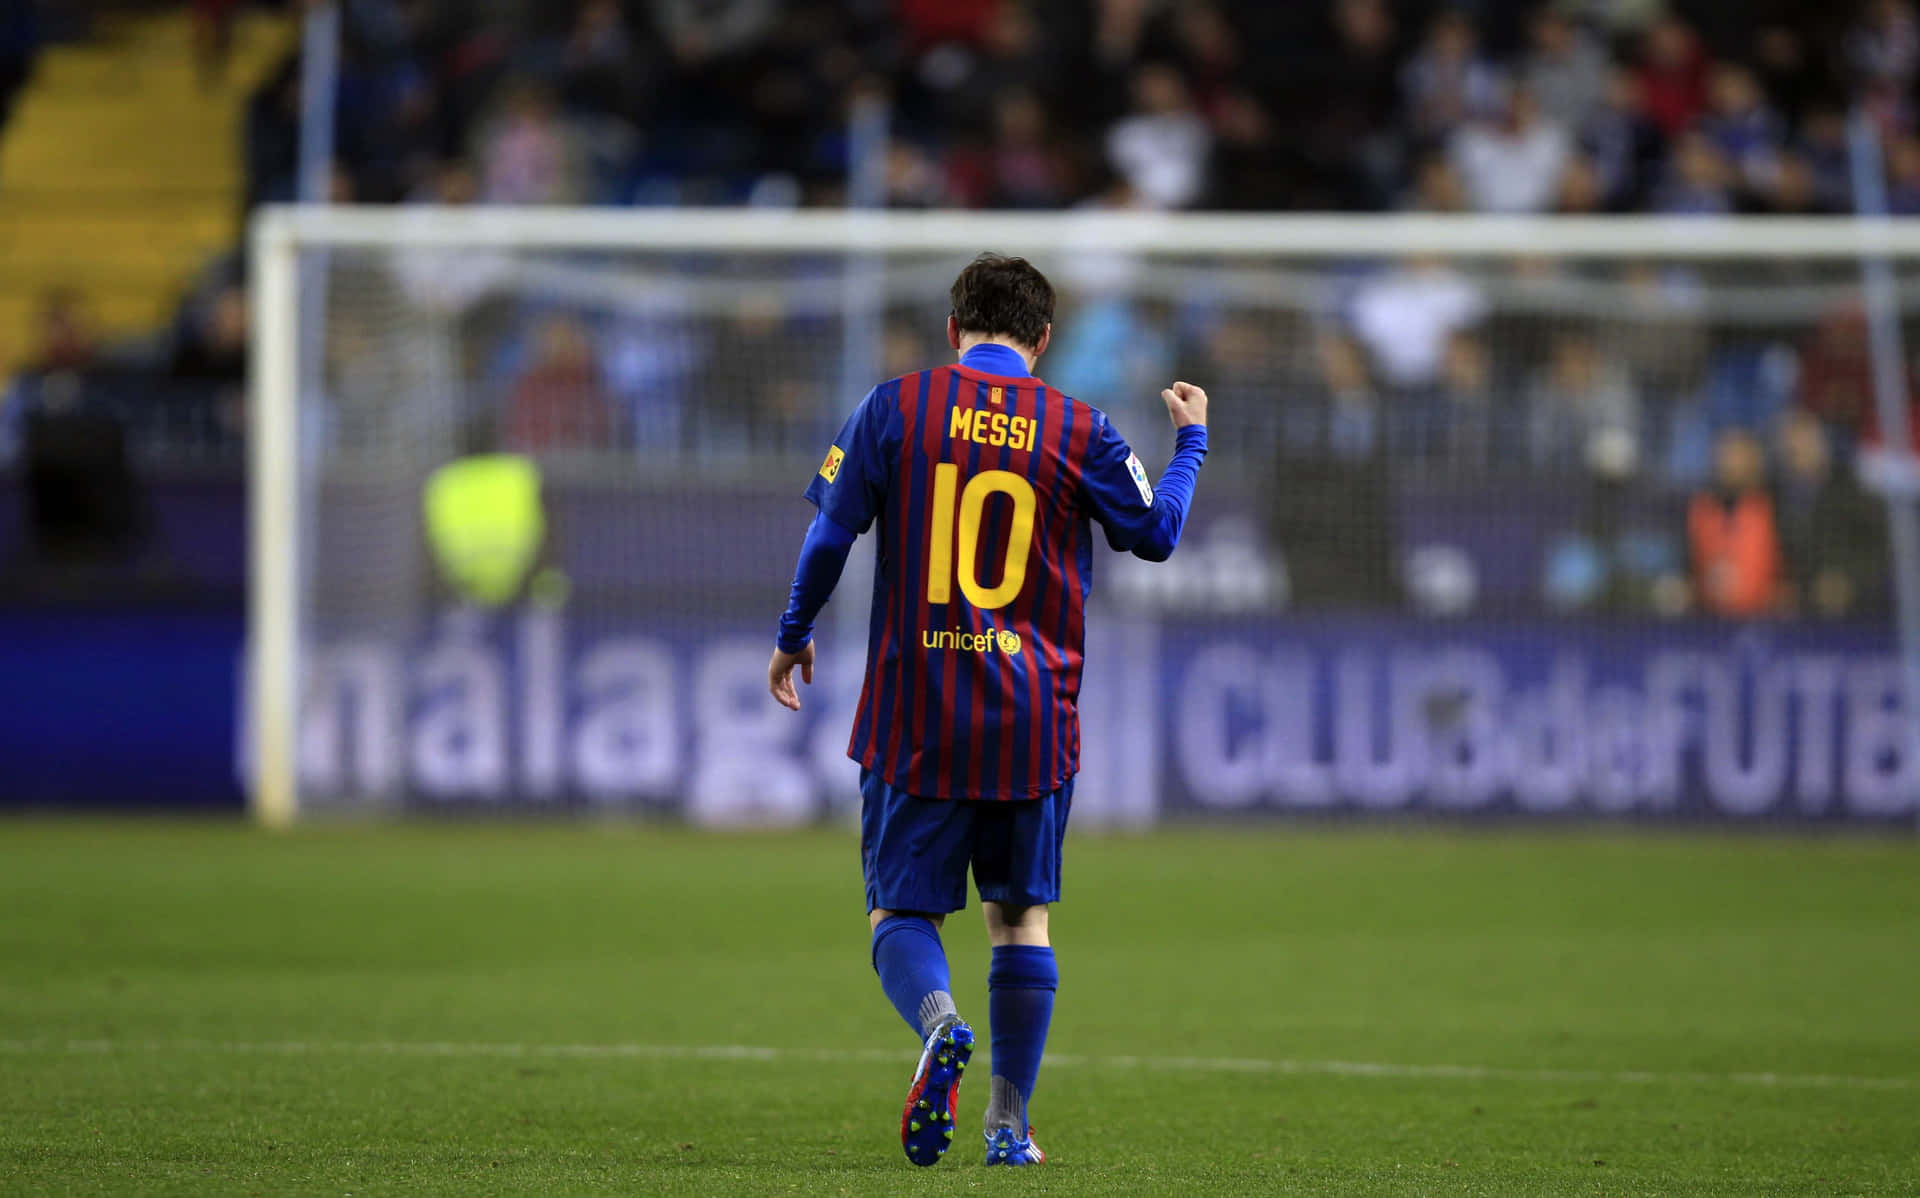 Messi - Always Finishing at the Top